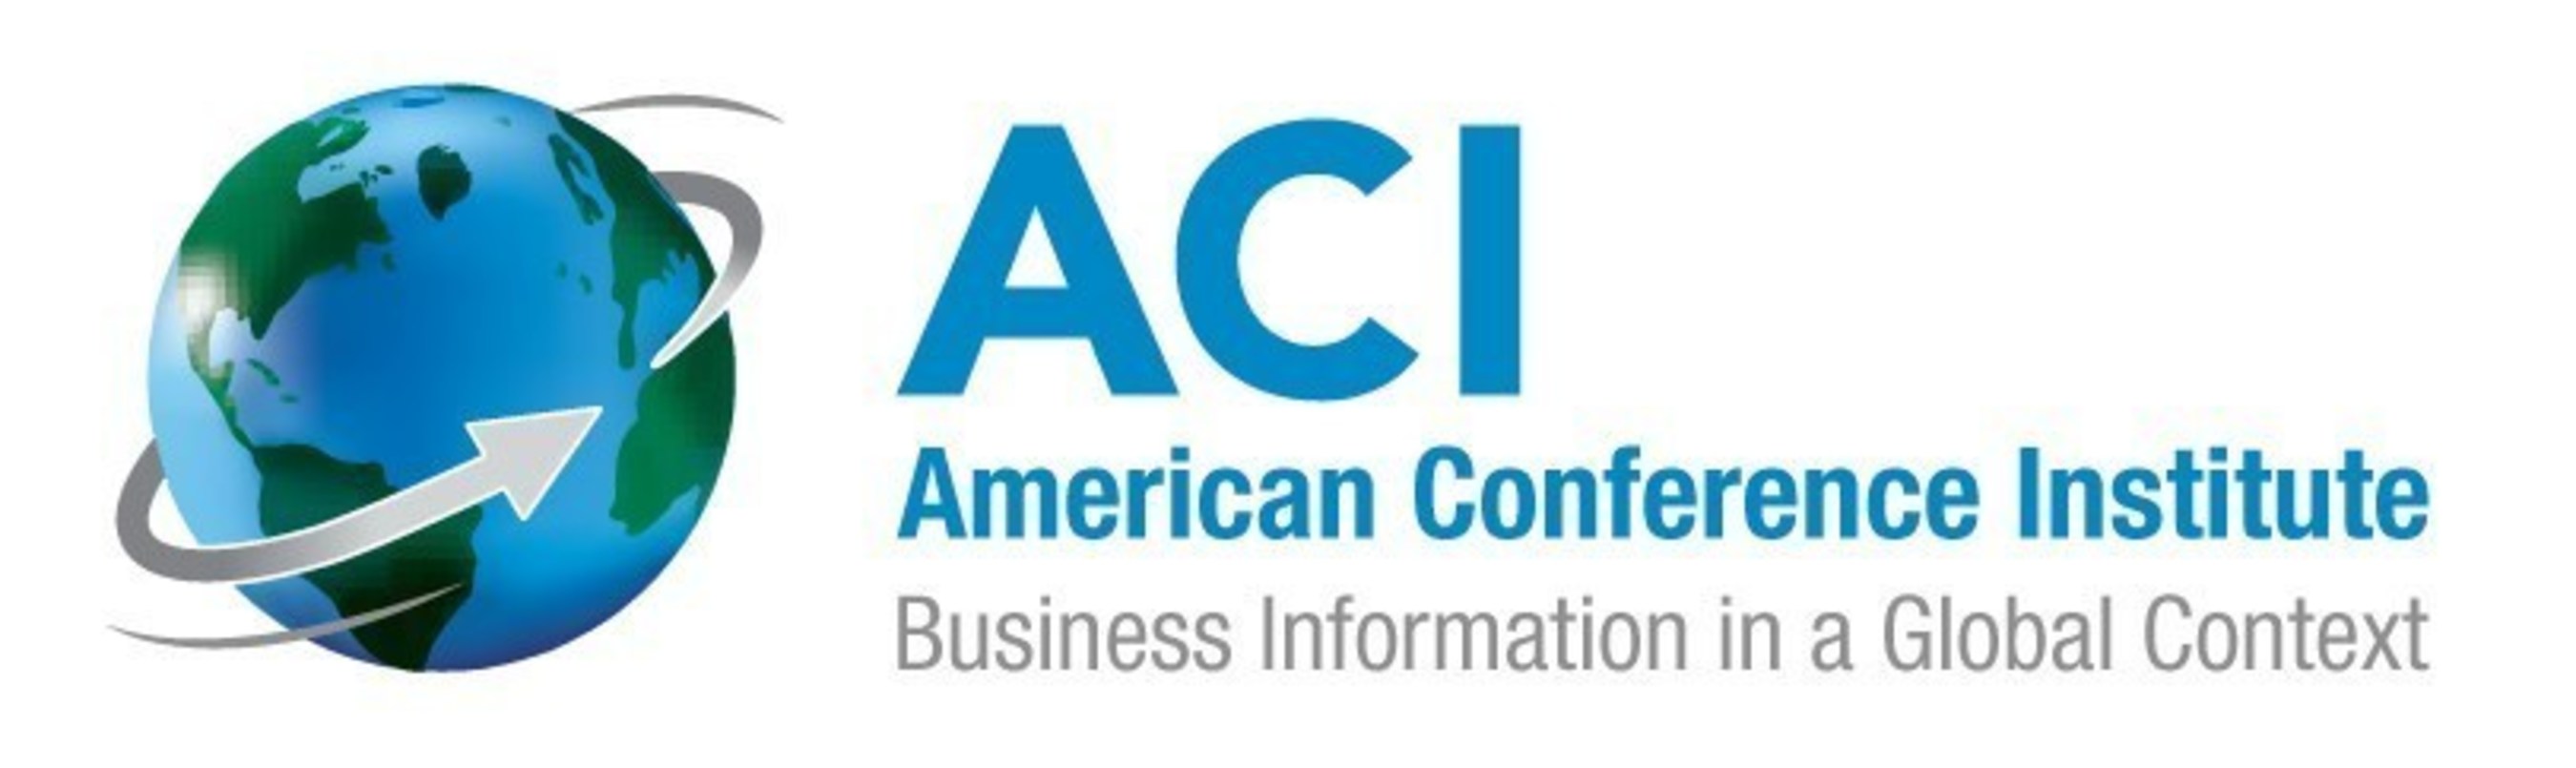 American Conference Institute. Business Information in a Global Context.